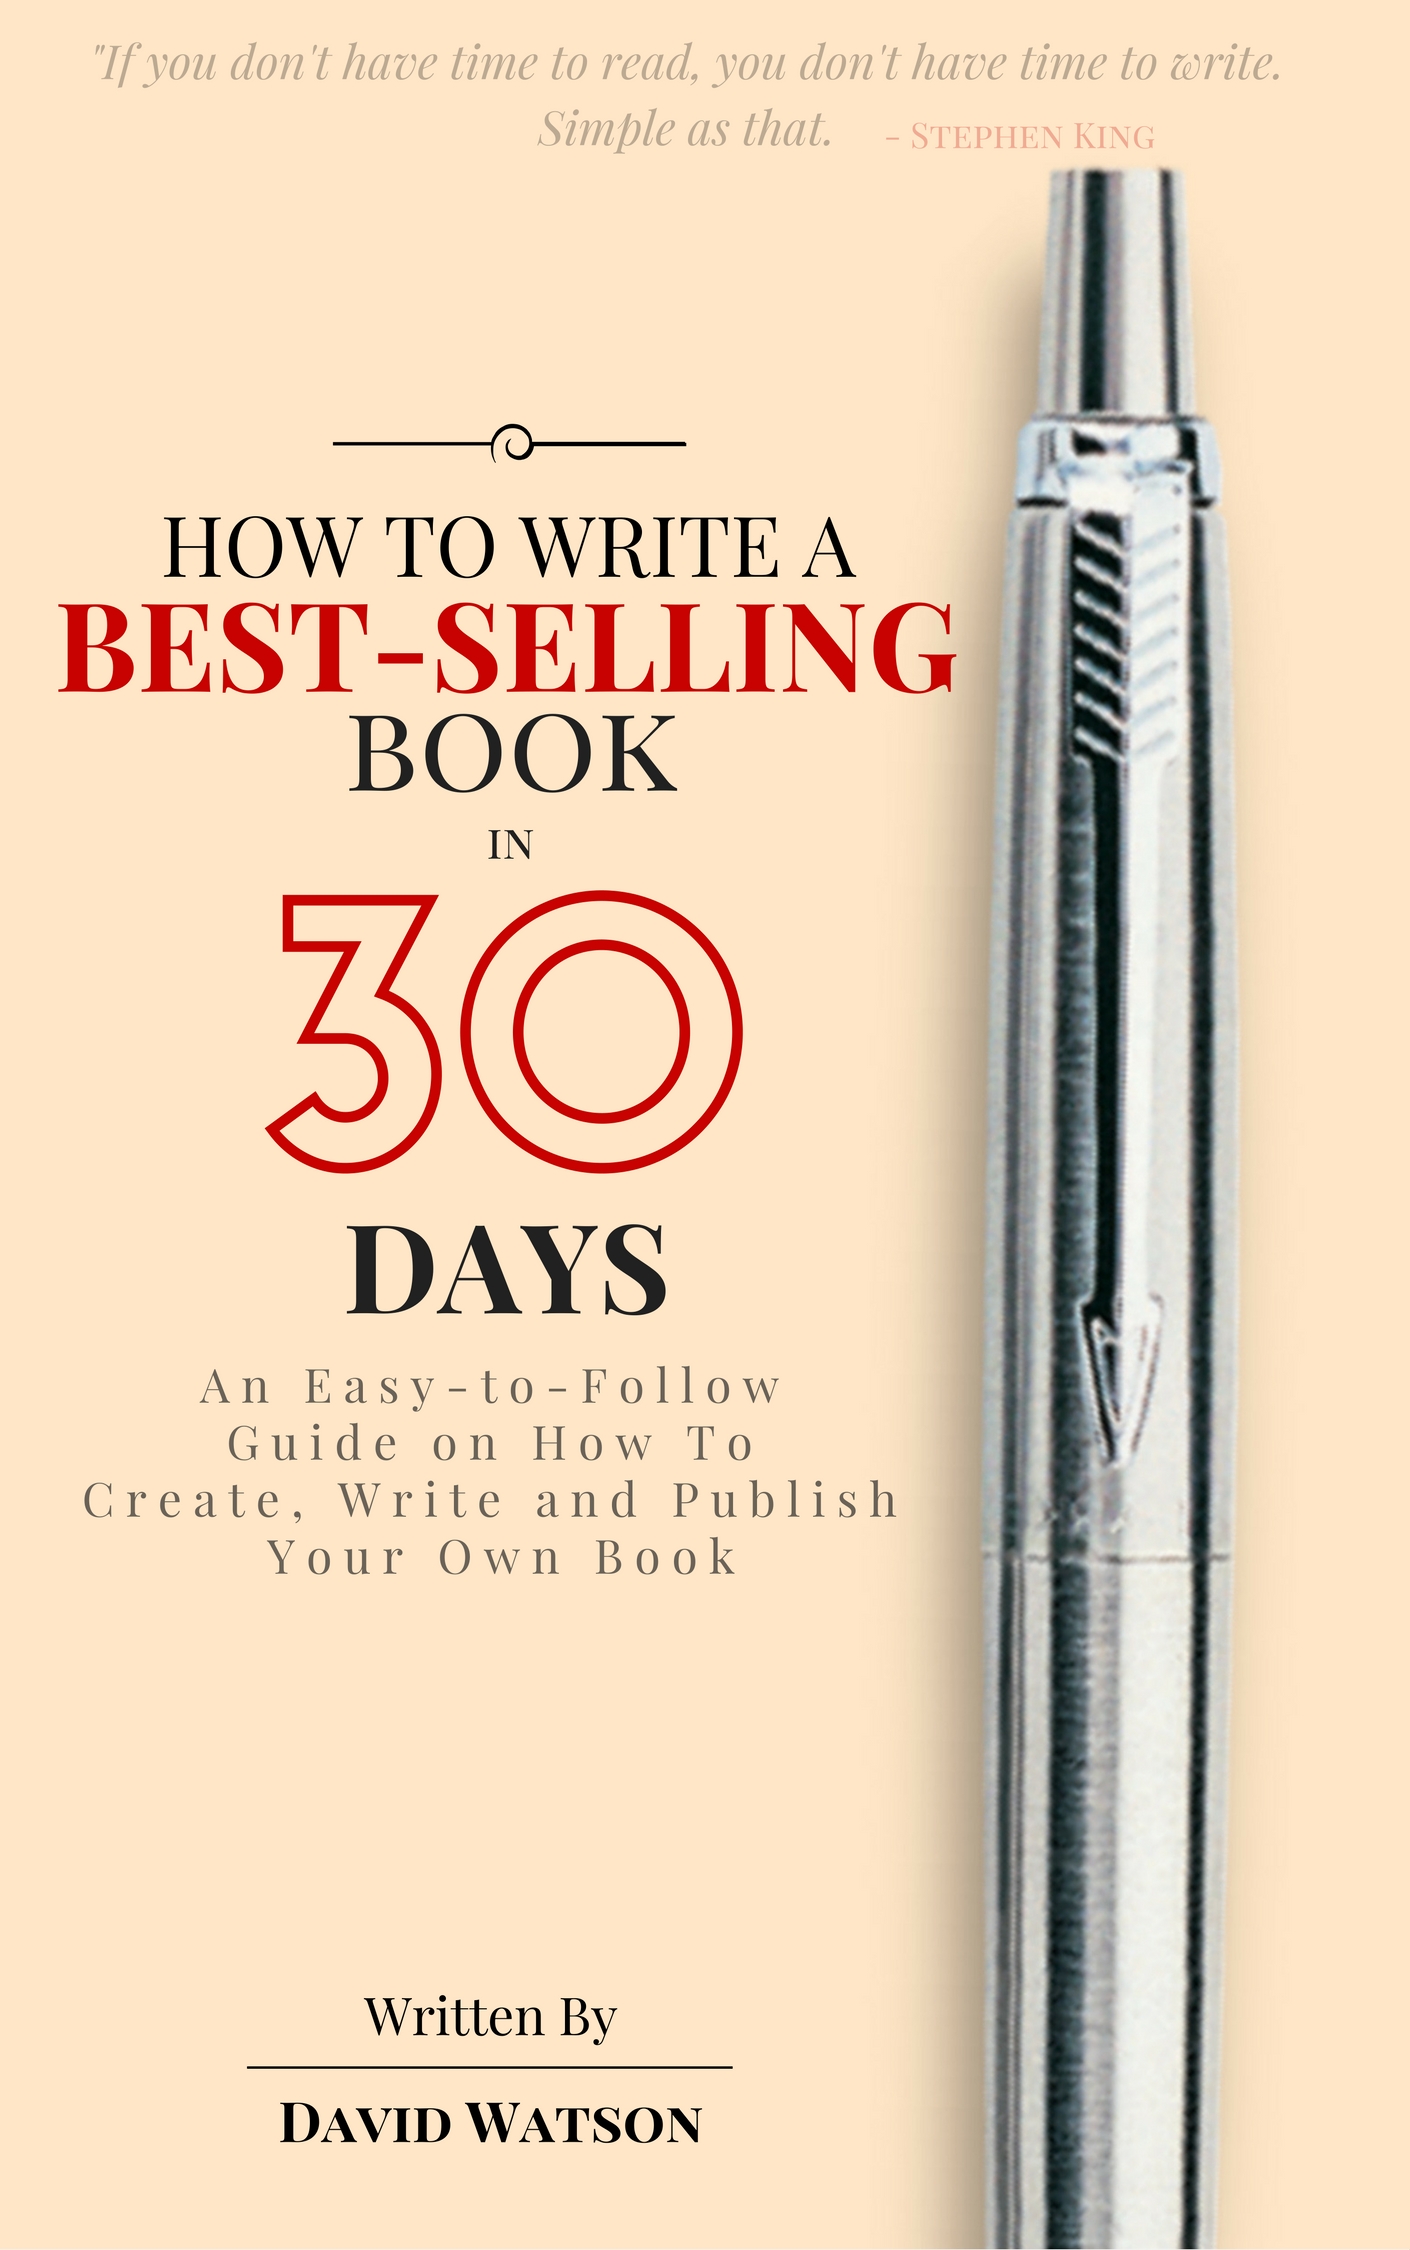 FREE: How to Write a Best-Selling Book in 30 Days: An Easy-to-Follow Guide on How To Create, Write and Publish Your Own Book by David Watson